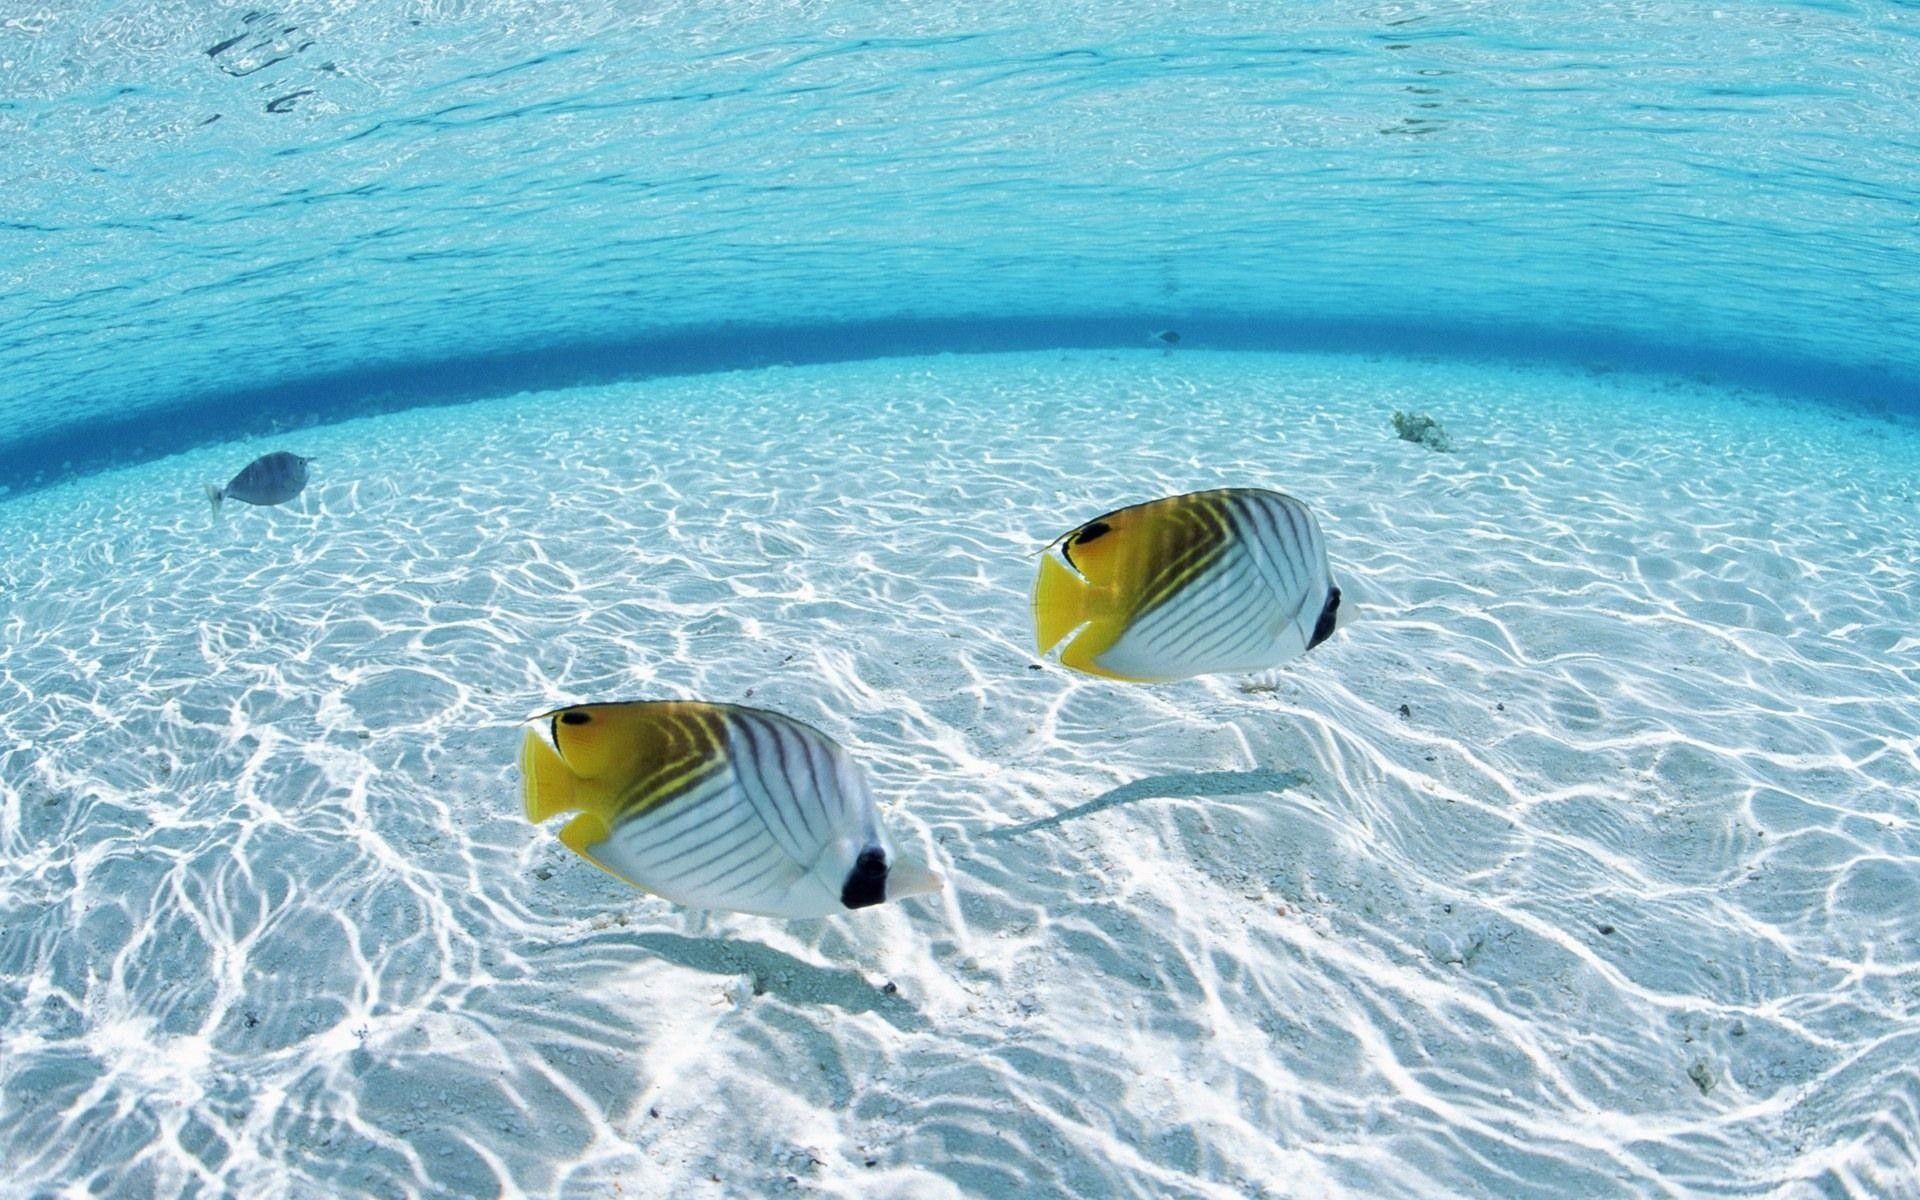 Two fish swimming in the clear water - Ocean, underwater, fish